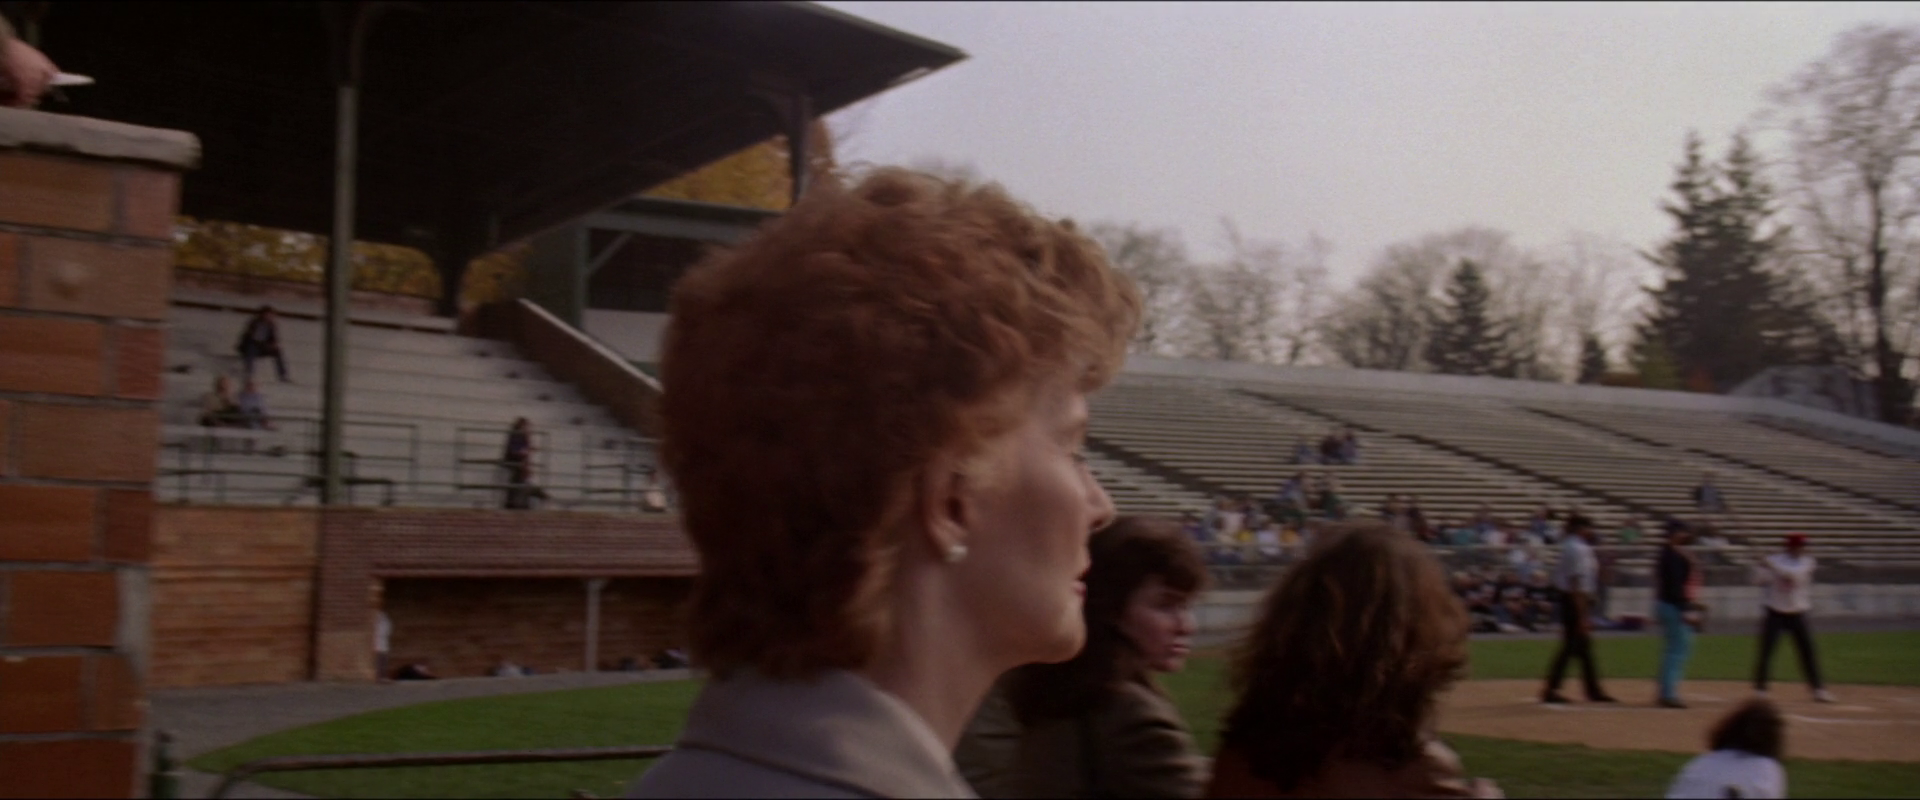 /ŮӰ A.League.of.Their.Own.1992.1080p.BluRay.X264-AMIABLE 9.84GB-2.png